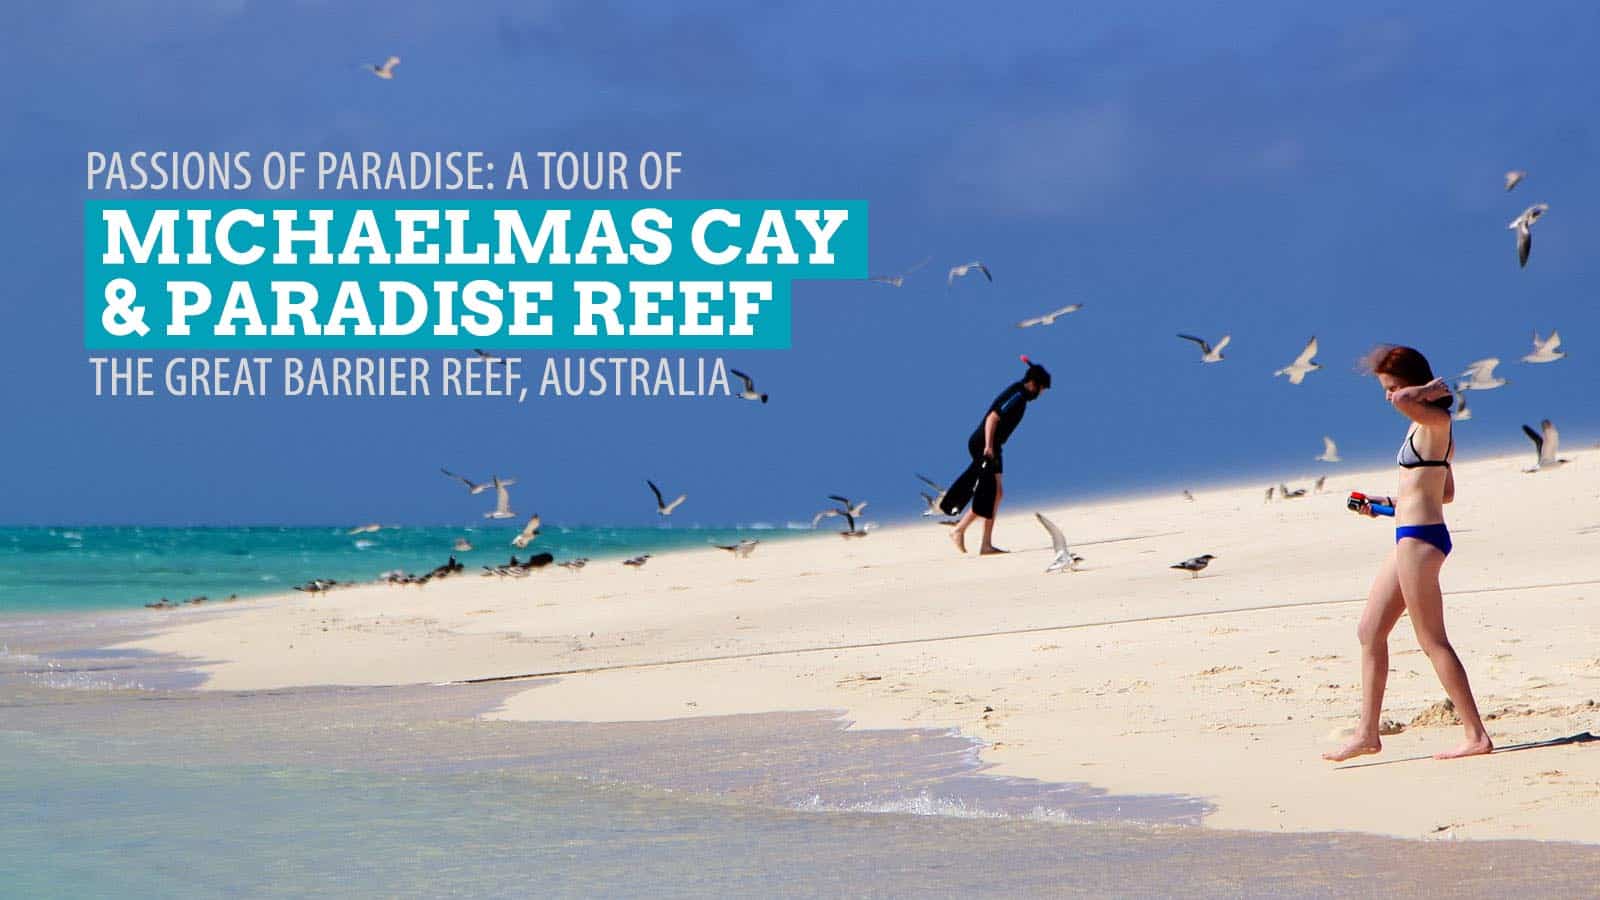 Passions of Paradise: Michaelmas Cay and the Great Barrier Reef, Australia